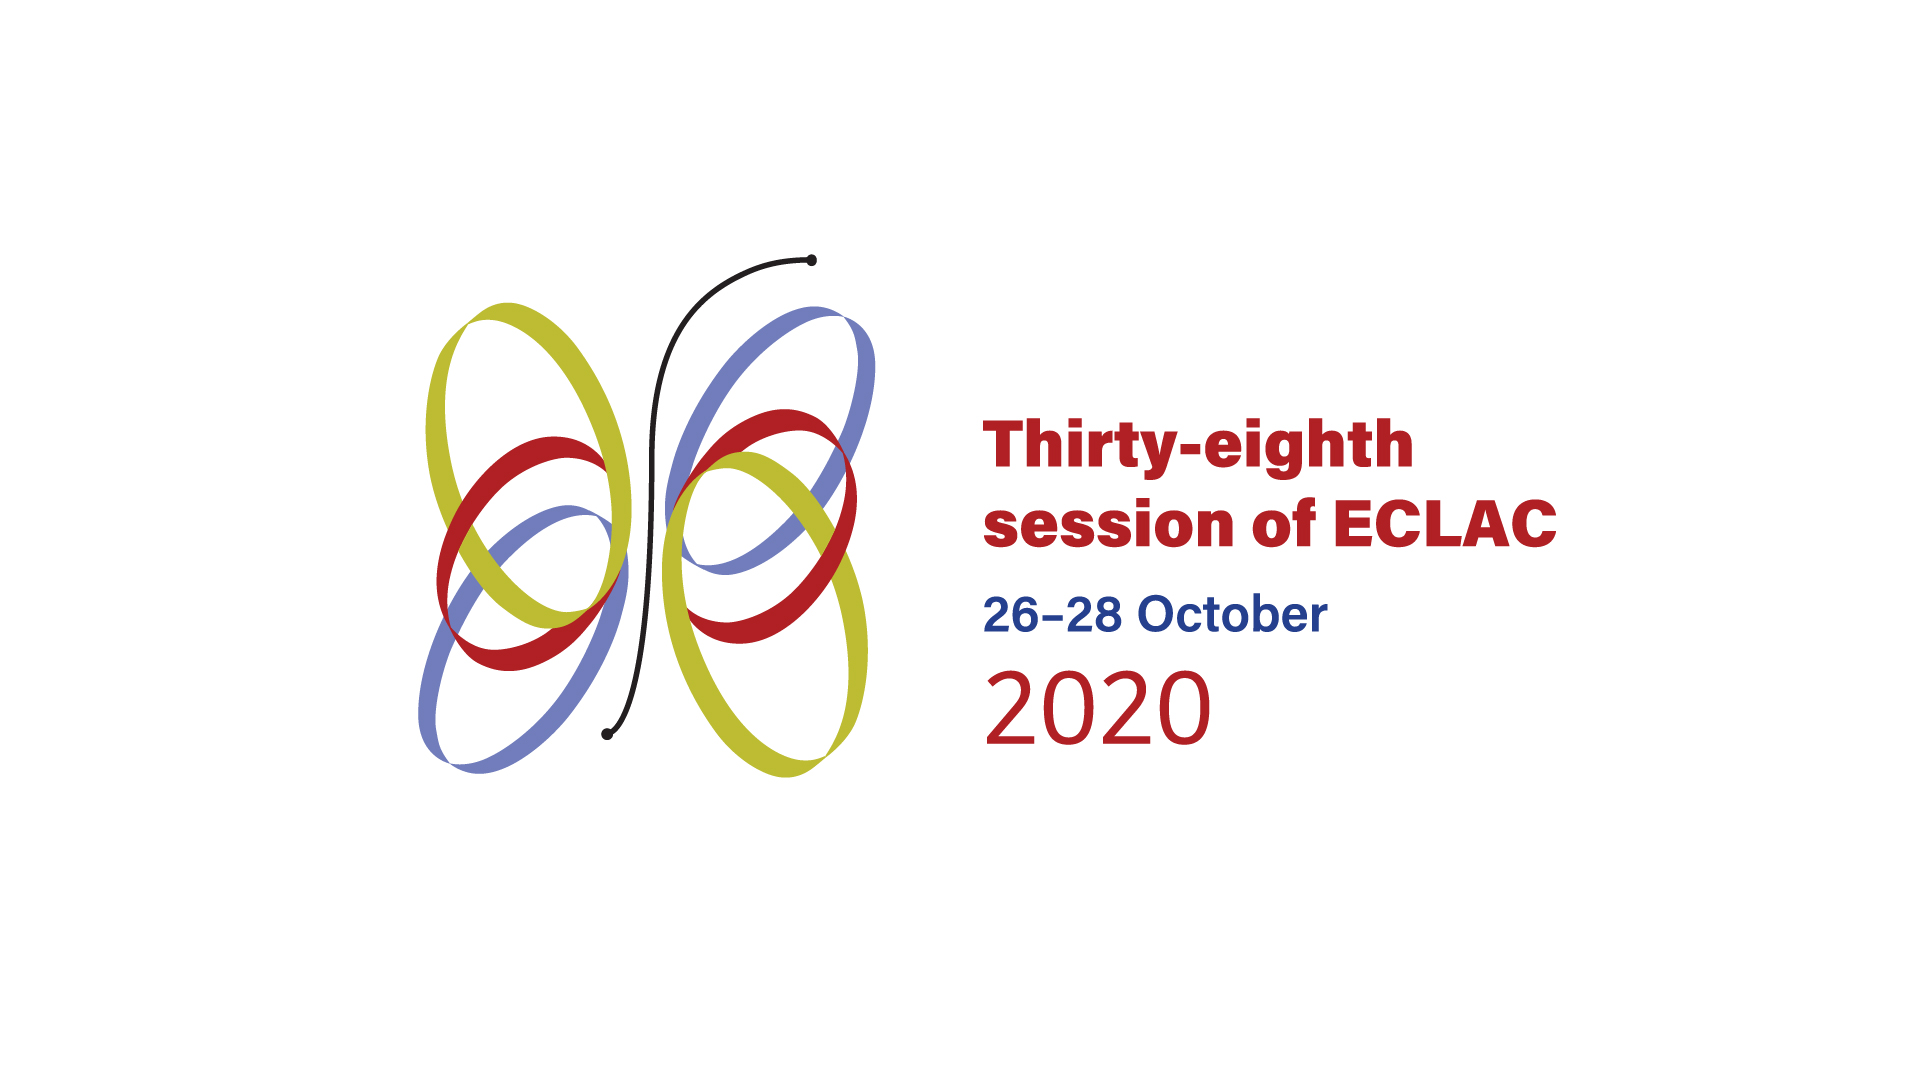 Thirty-eighth Session of ECLAC's logo